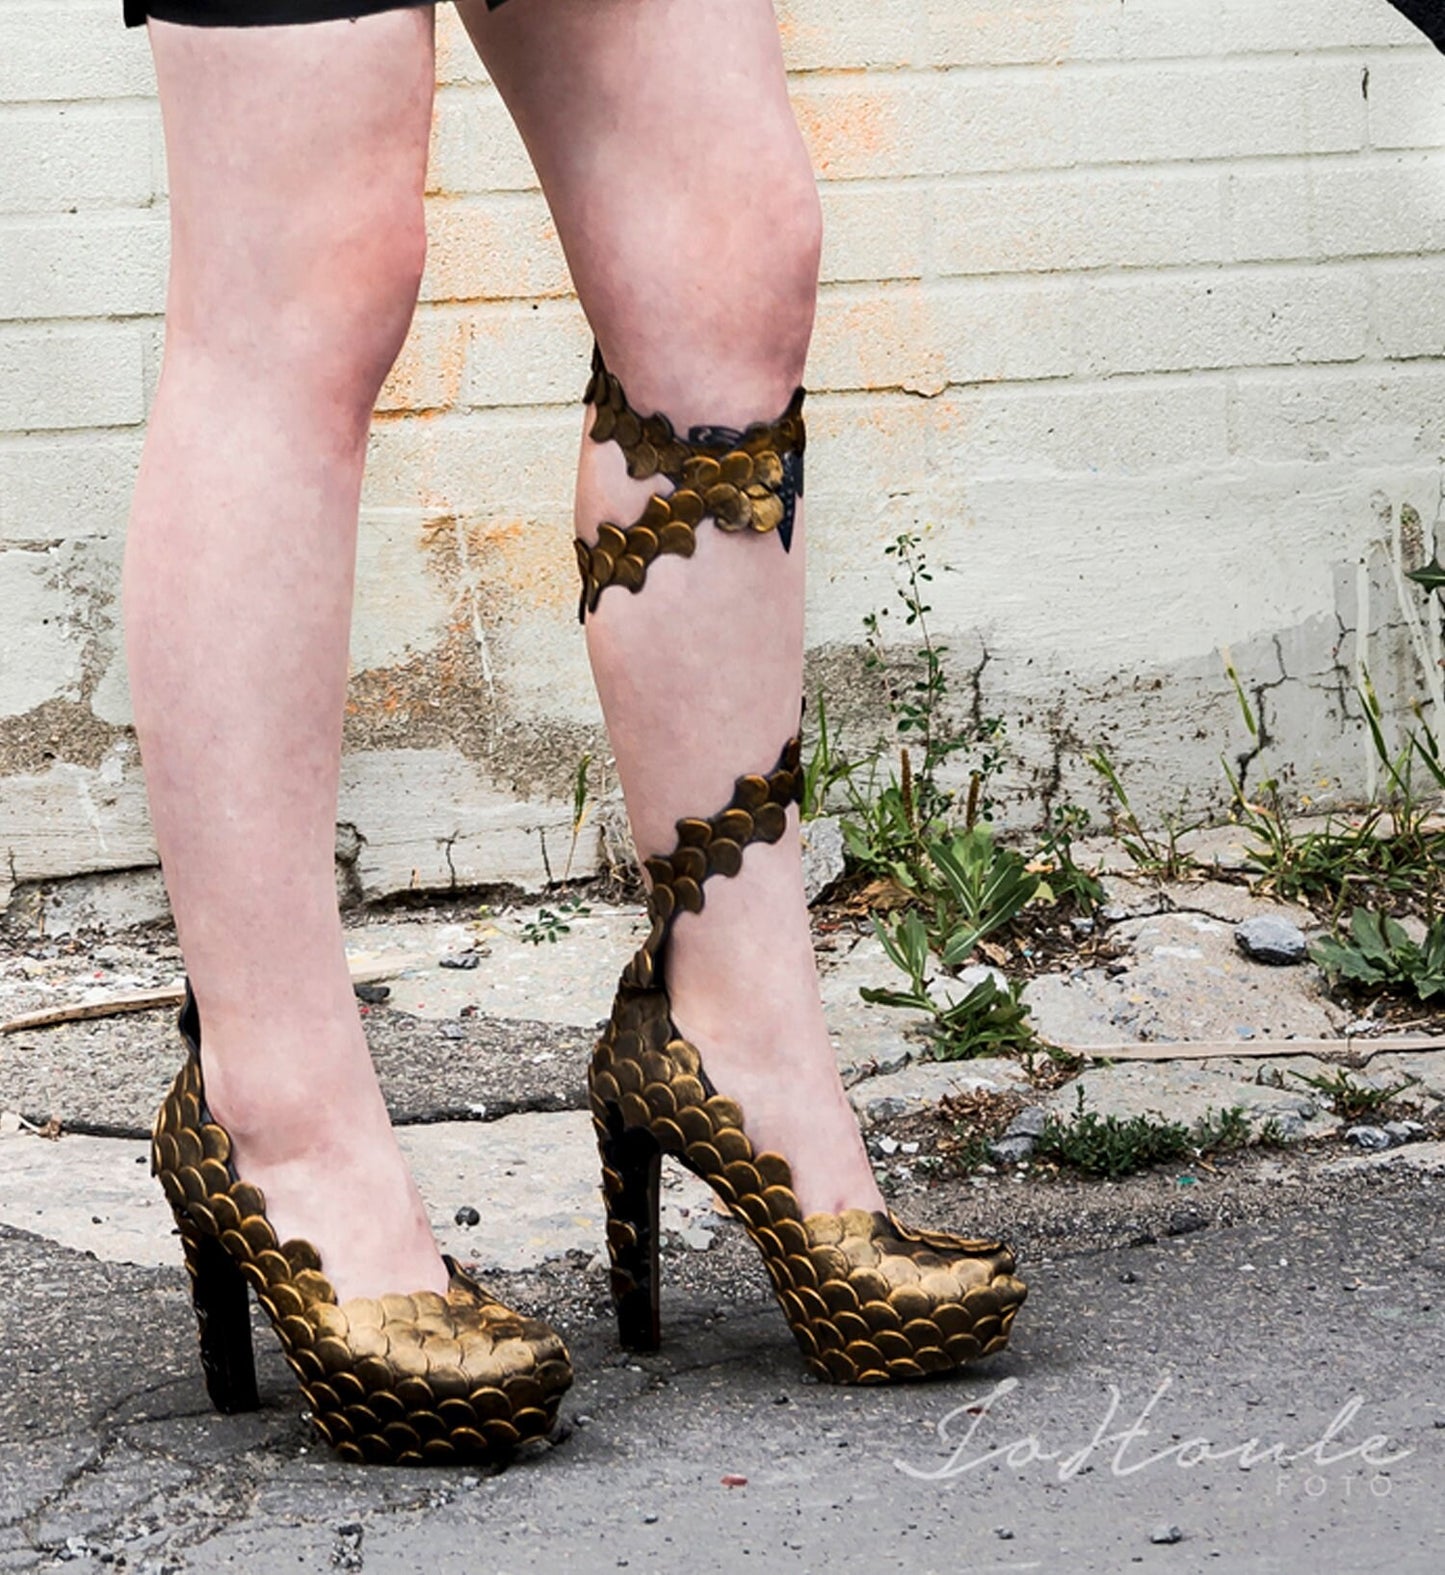 Shoes / High heels, covered with gold and black silicone, fish scales / mermaid / dragon!